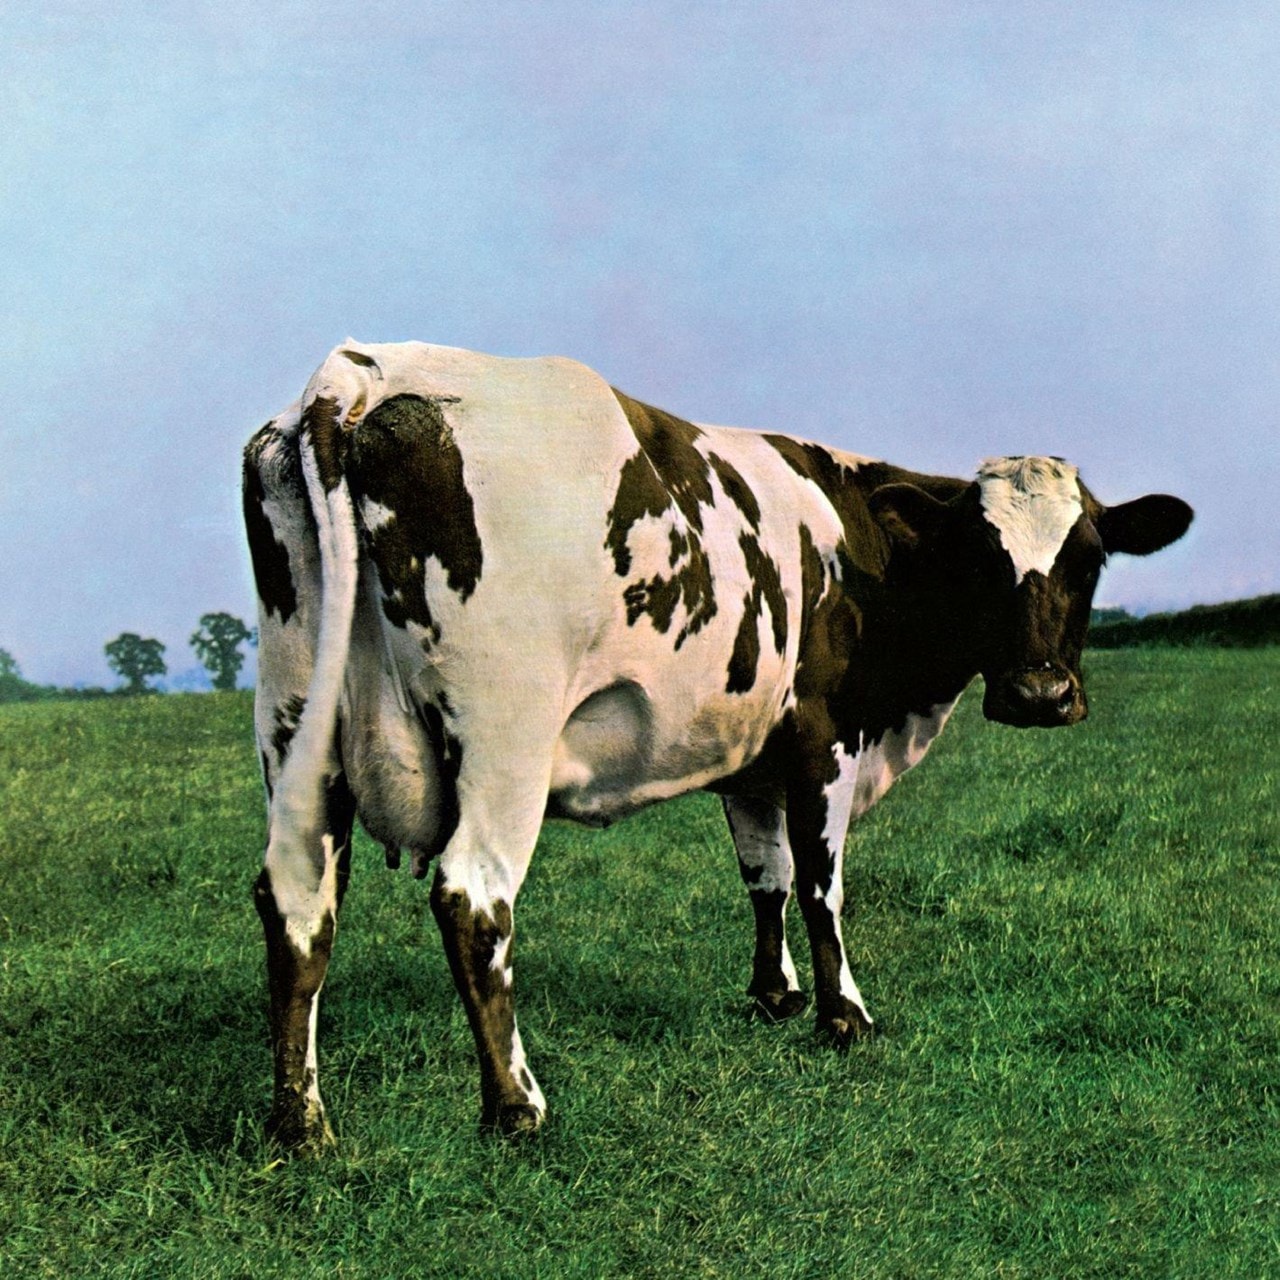 when was atom heart mother first performed live